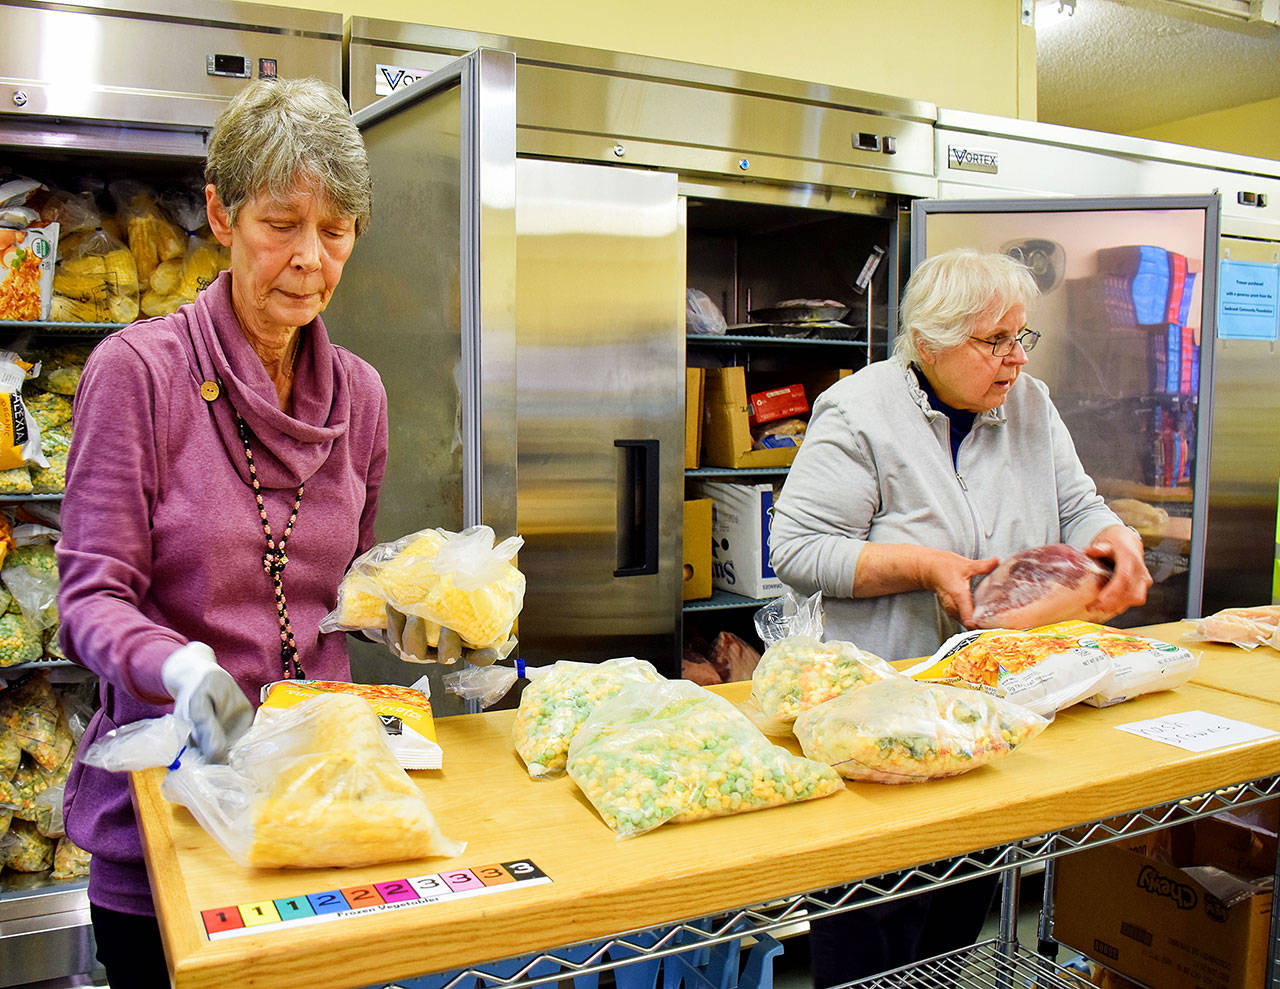 Caption: Ocean Shores Food Bank volunteers Myriam Moist, left, and Arlene Stephenson, take frozen vegetables and meats out of the three new freezers the Food Bank recently purchased with part of a $10,000 from the Seabrook Community Foundation. Photo by Scott D. Johnston